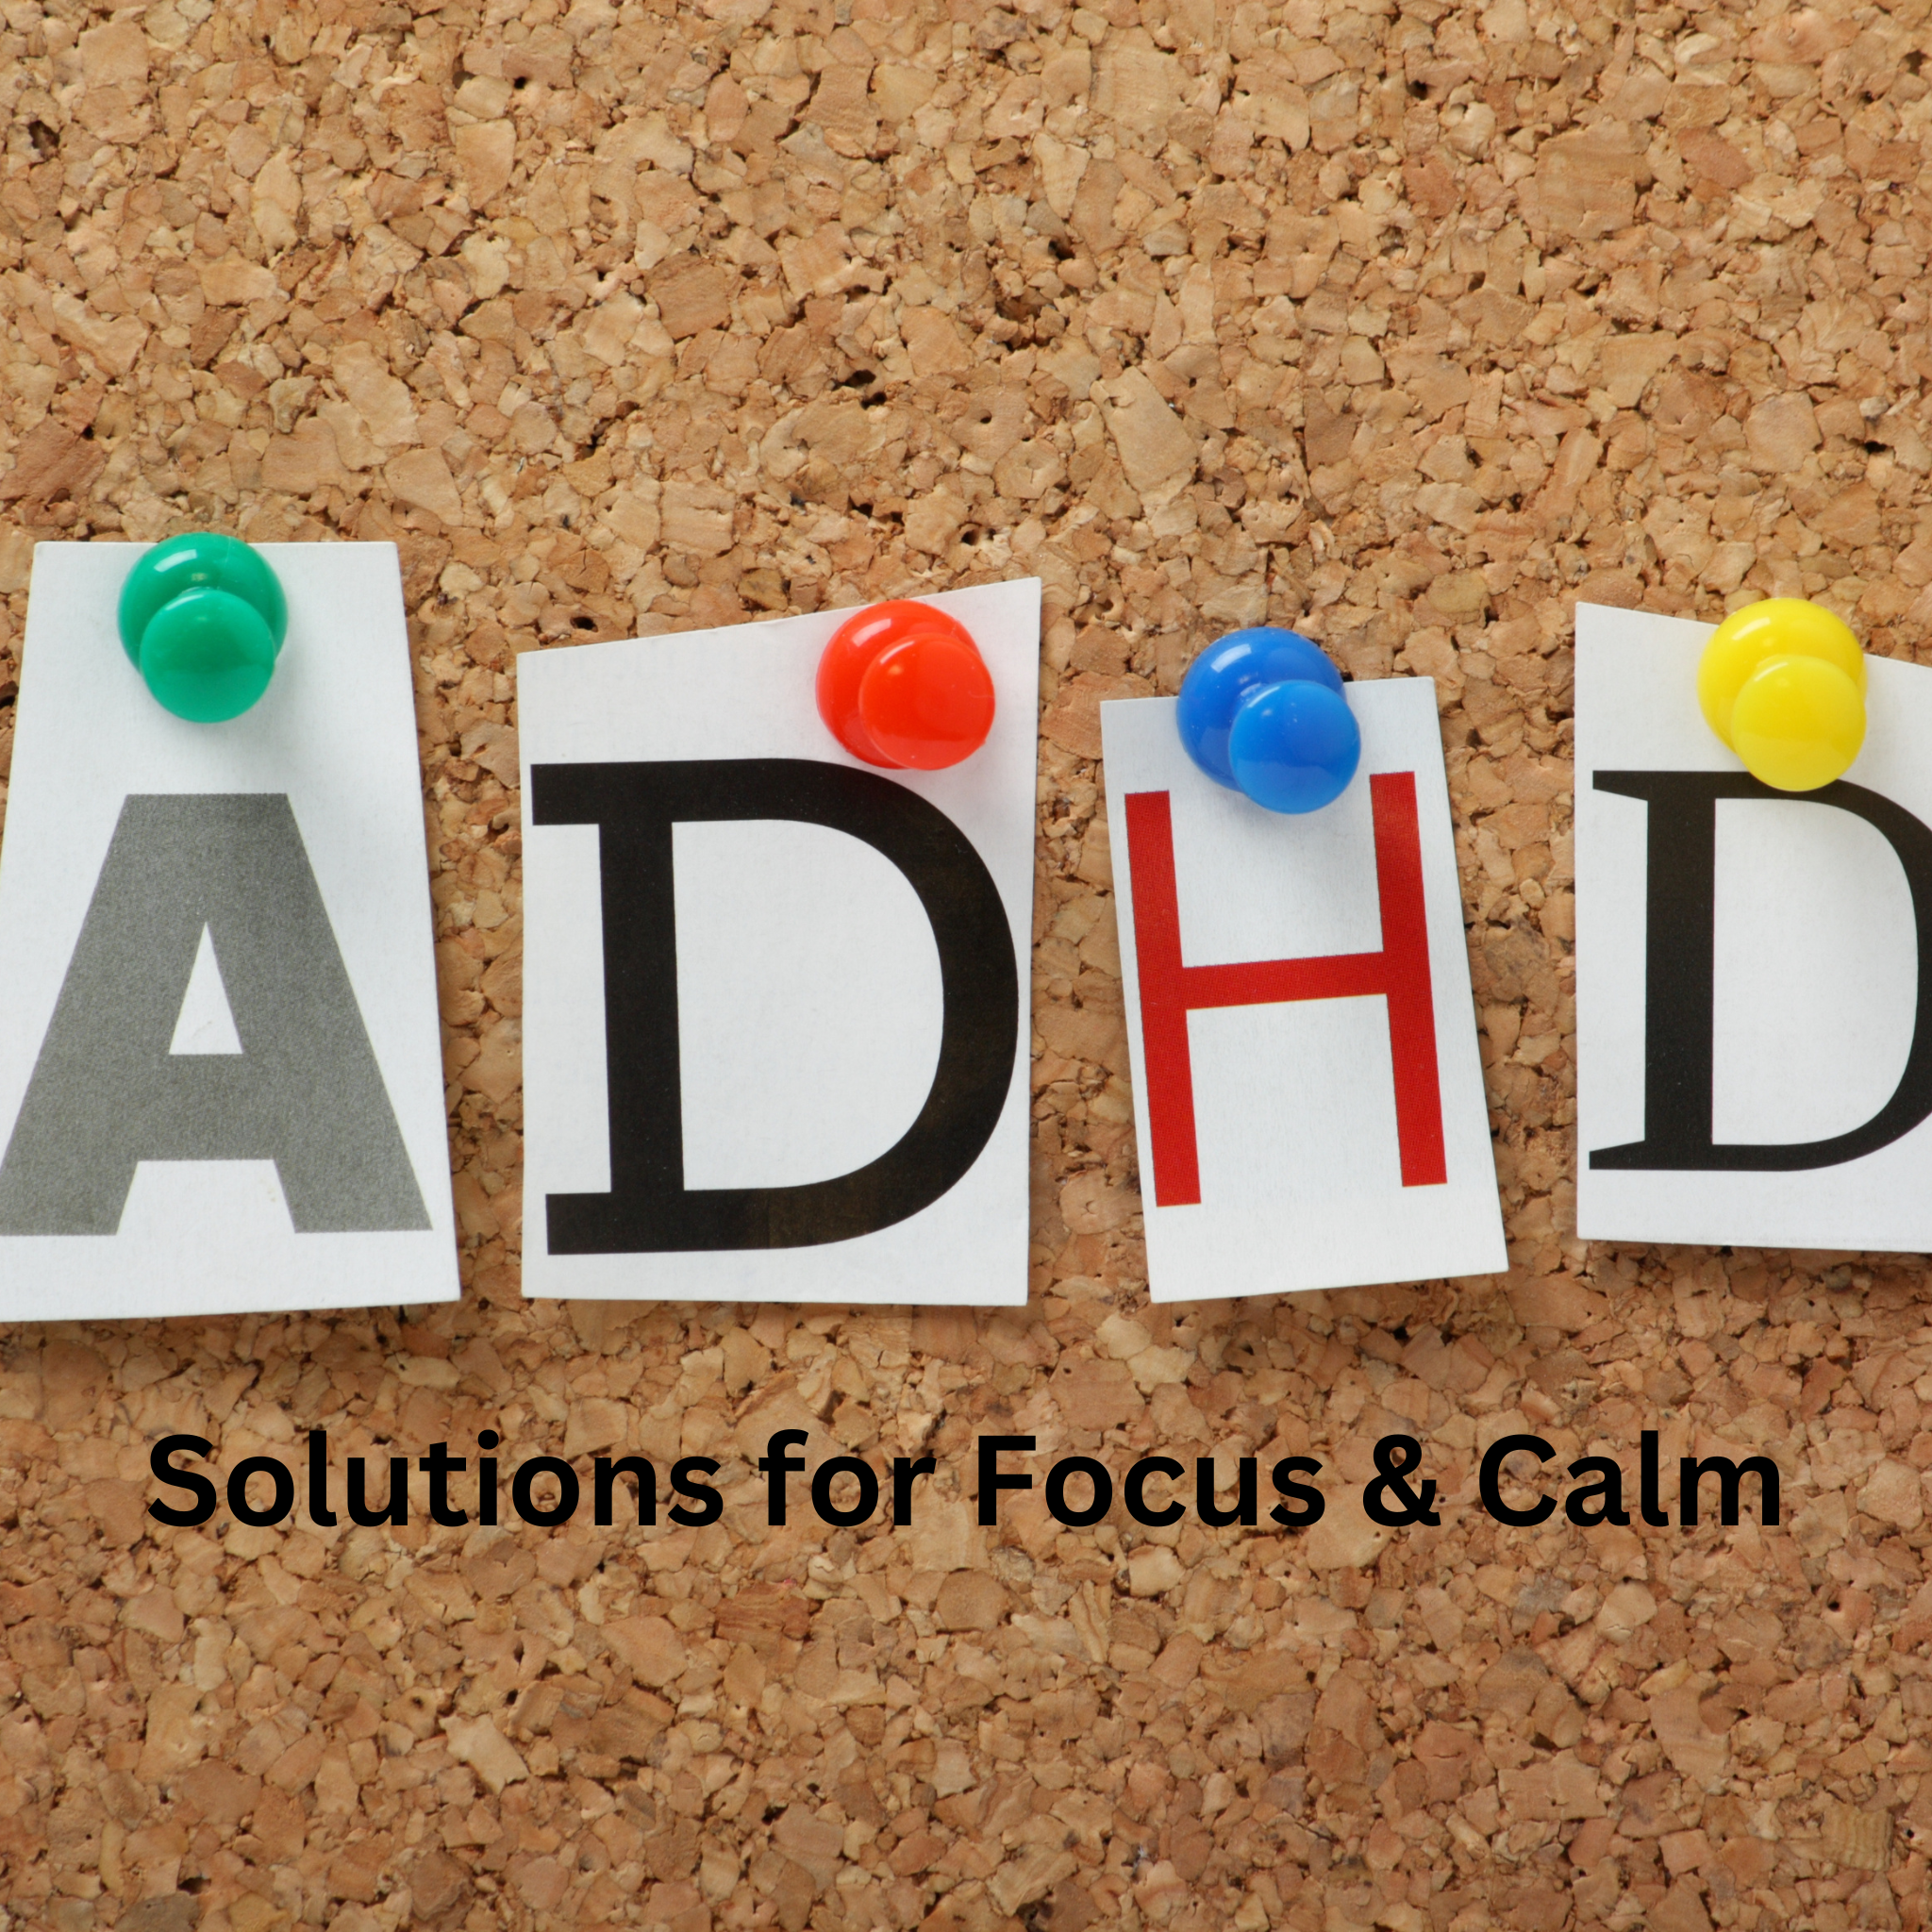 the letters ADHD on a cork board with words "solutions for focus and calm